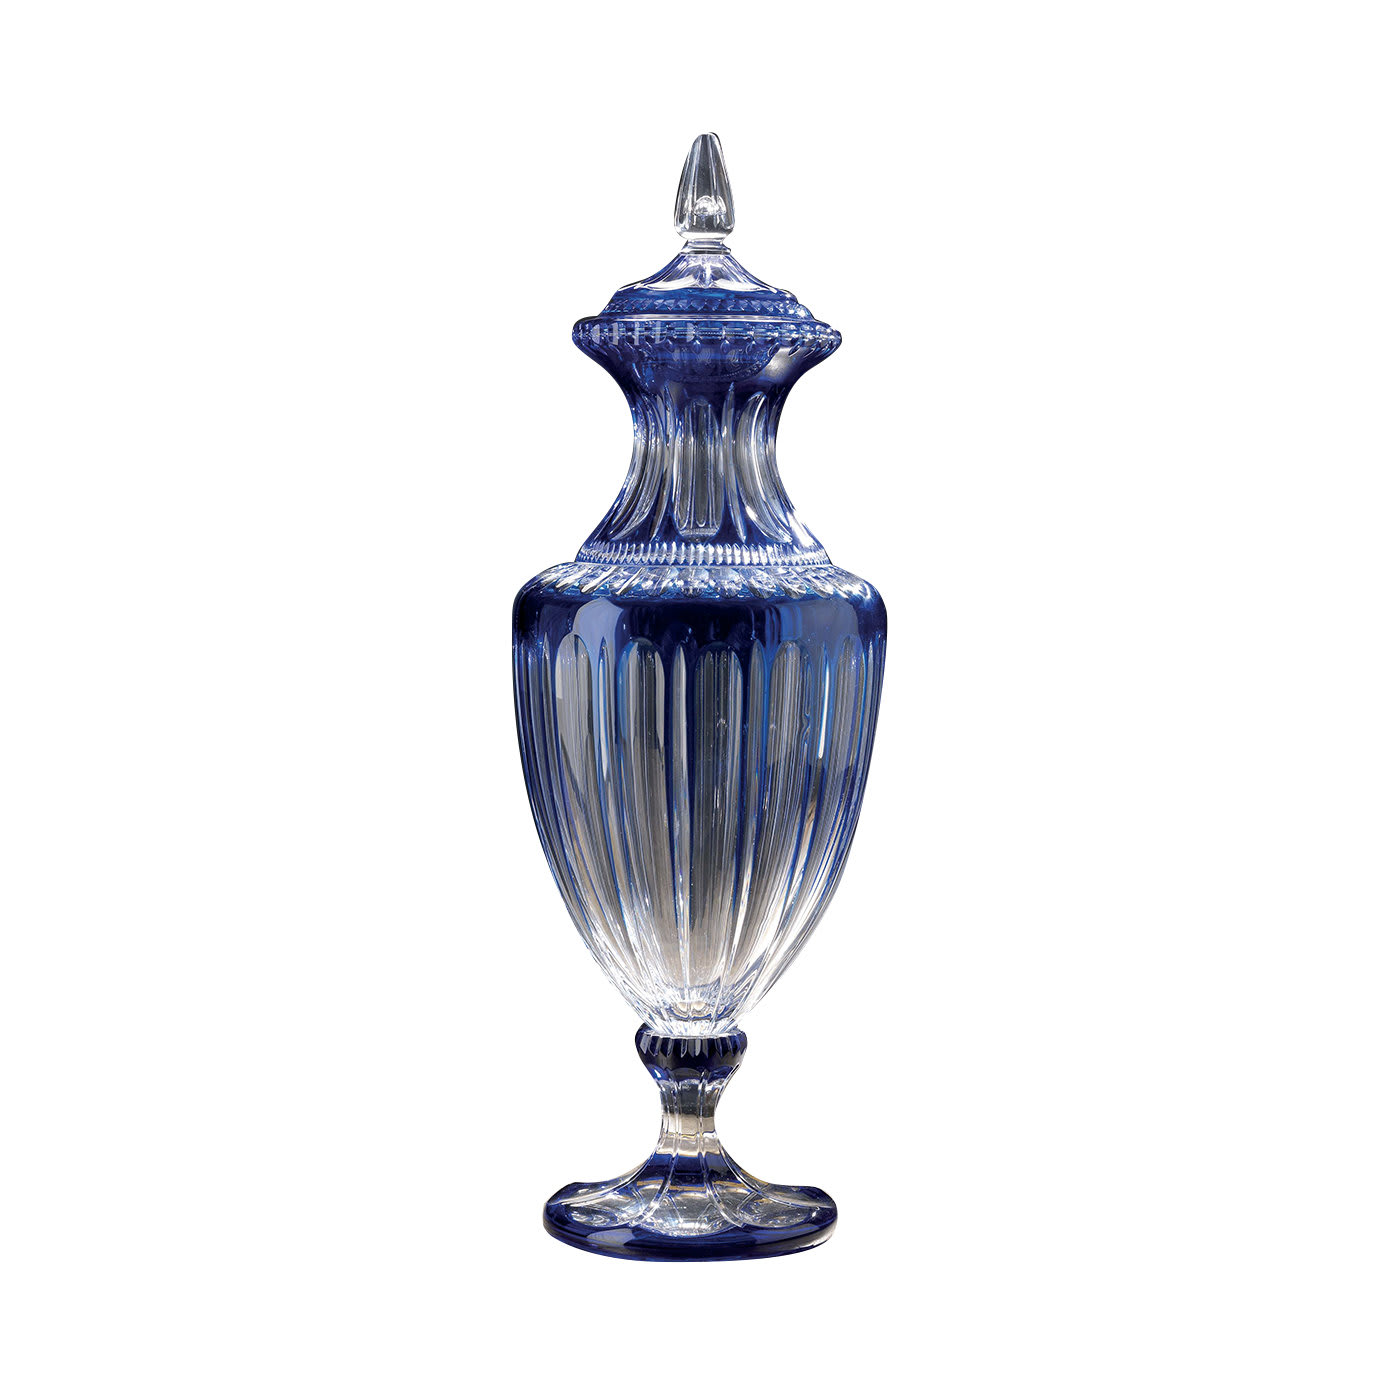 Amphora Crystal Vase in Amber and Blue - Nuova Cev